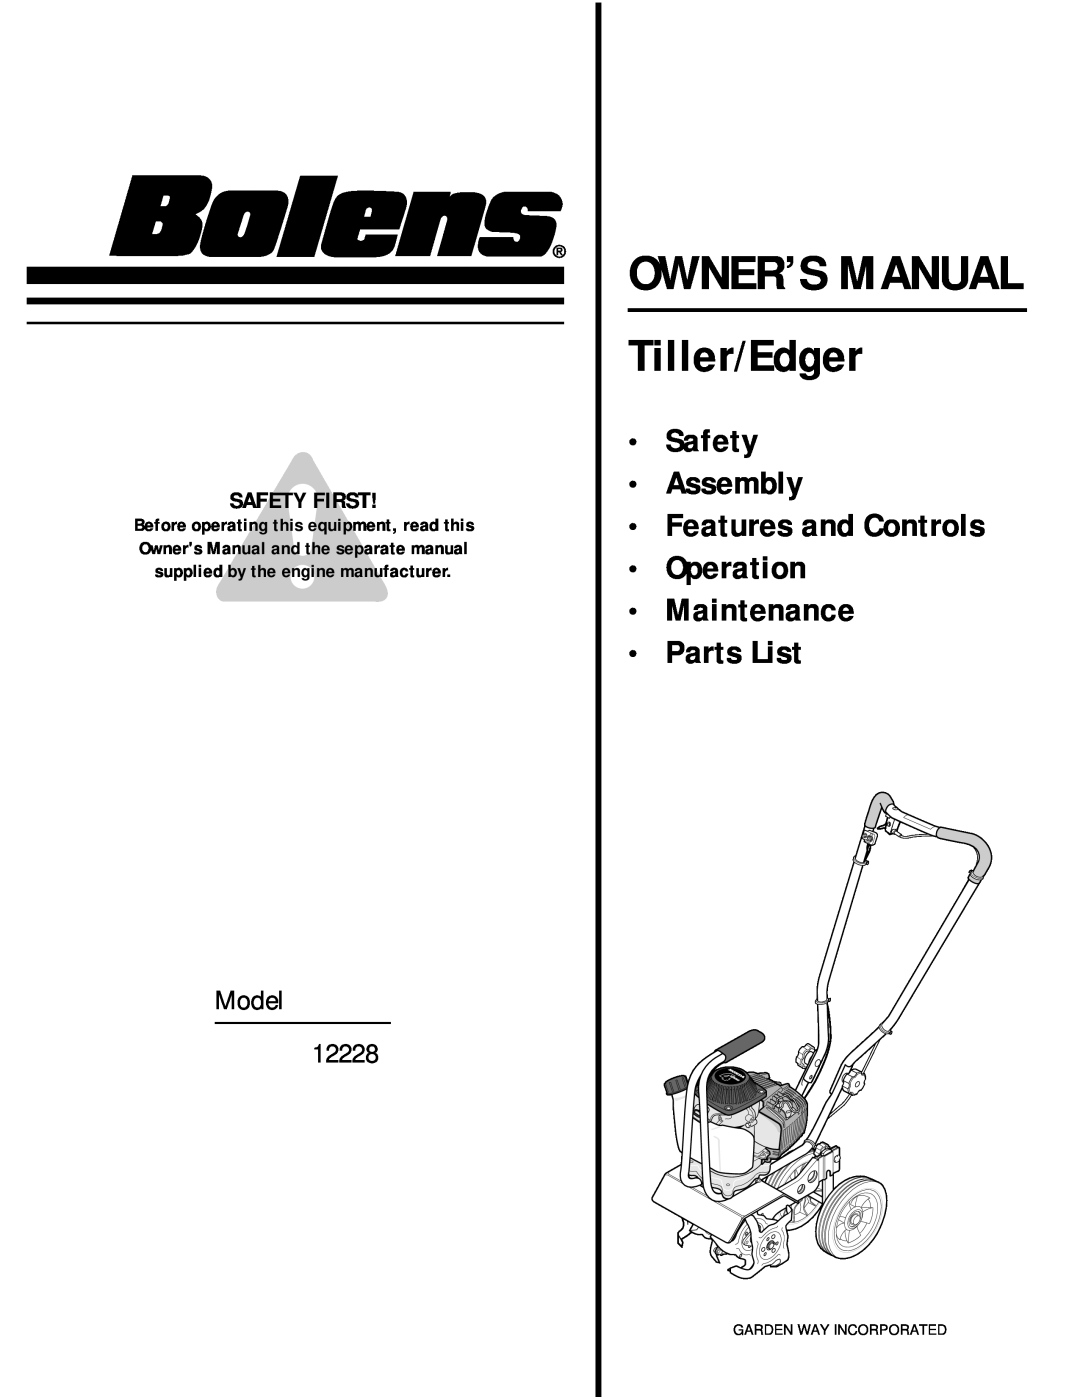 Bolens 12228 owner manual Safety First, Tiller/Edger, Safety Assembly Features and Controls, Model 